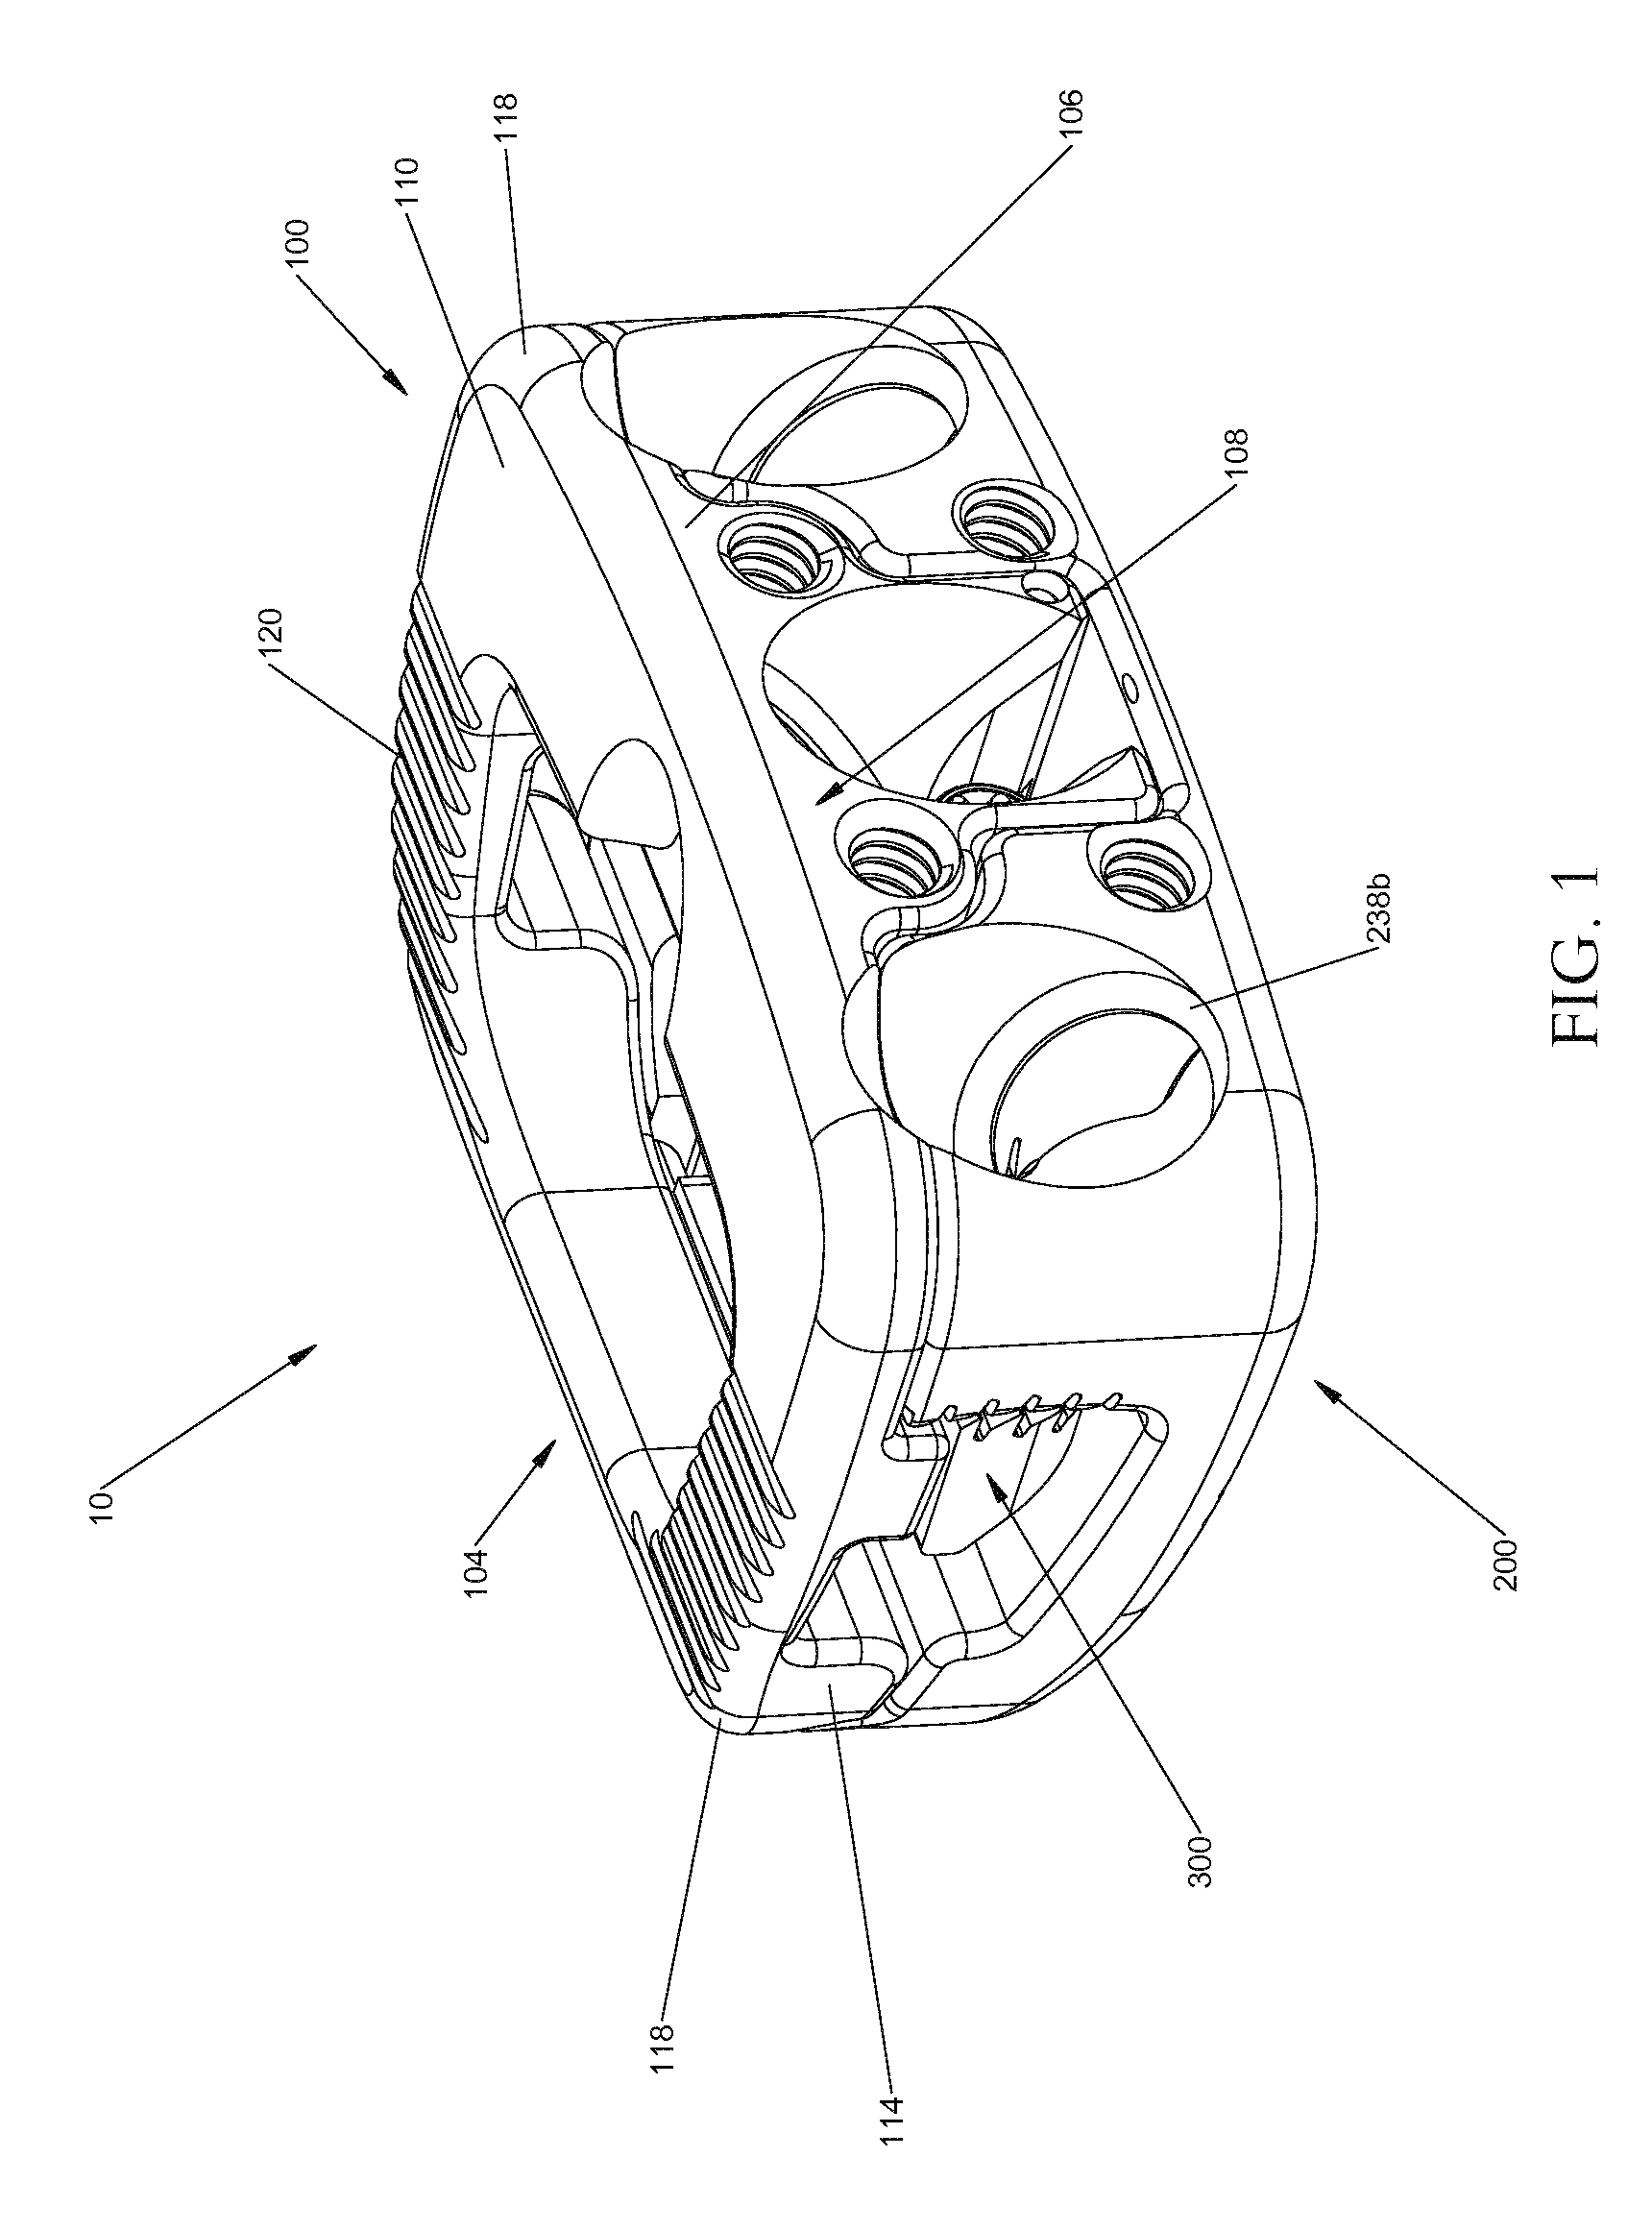 Expandable spinal interbody spacer and method of use